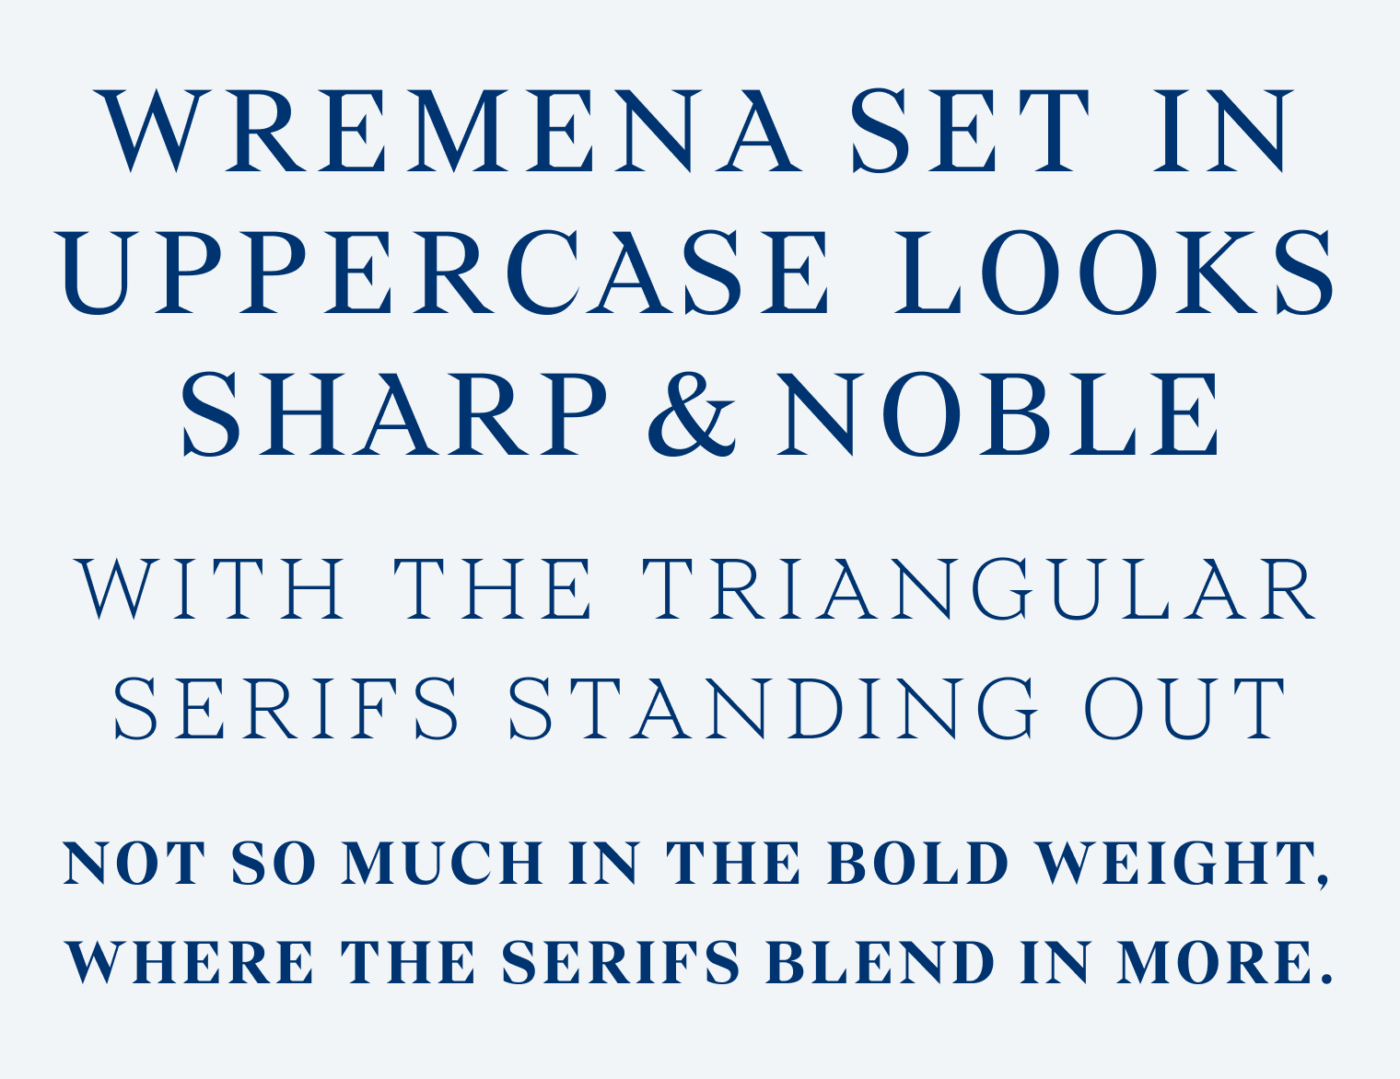 Times New Roman is very ordinary: A little body text in Times & Wremena to compare it. Times is what we are used to, so this might be even invisible to us. Some details in Wremena stand out, especially the extending serif at the apex of the upper case A. It's also more contrasting, wider and a bit less balanced than Times. with the triangular serifs standing out. Not so much in the bold weight, Where the serifs blend in more.